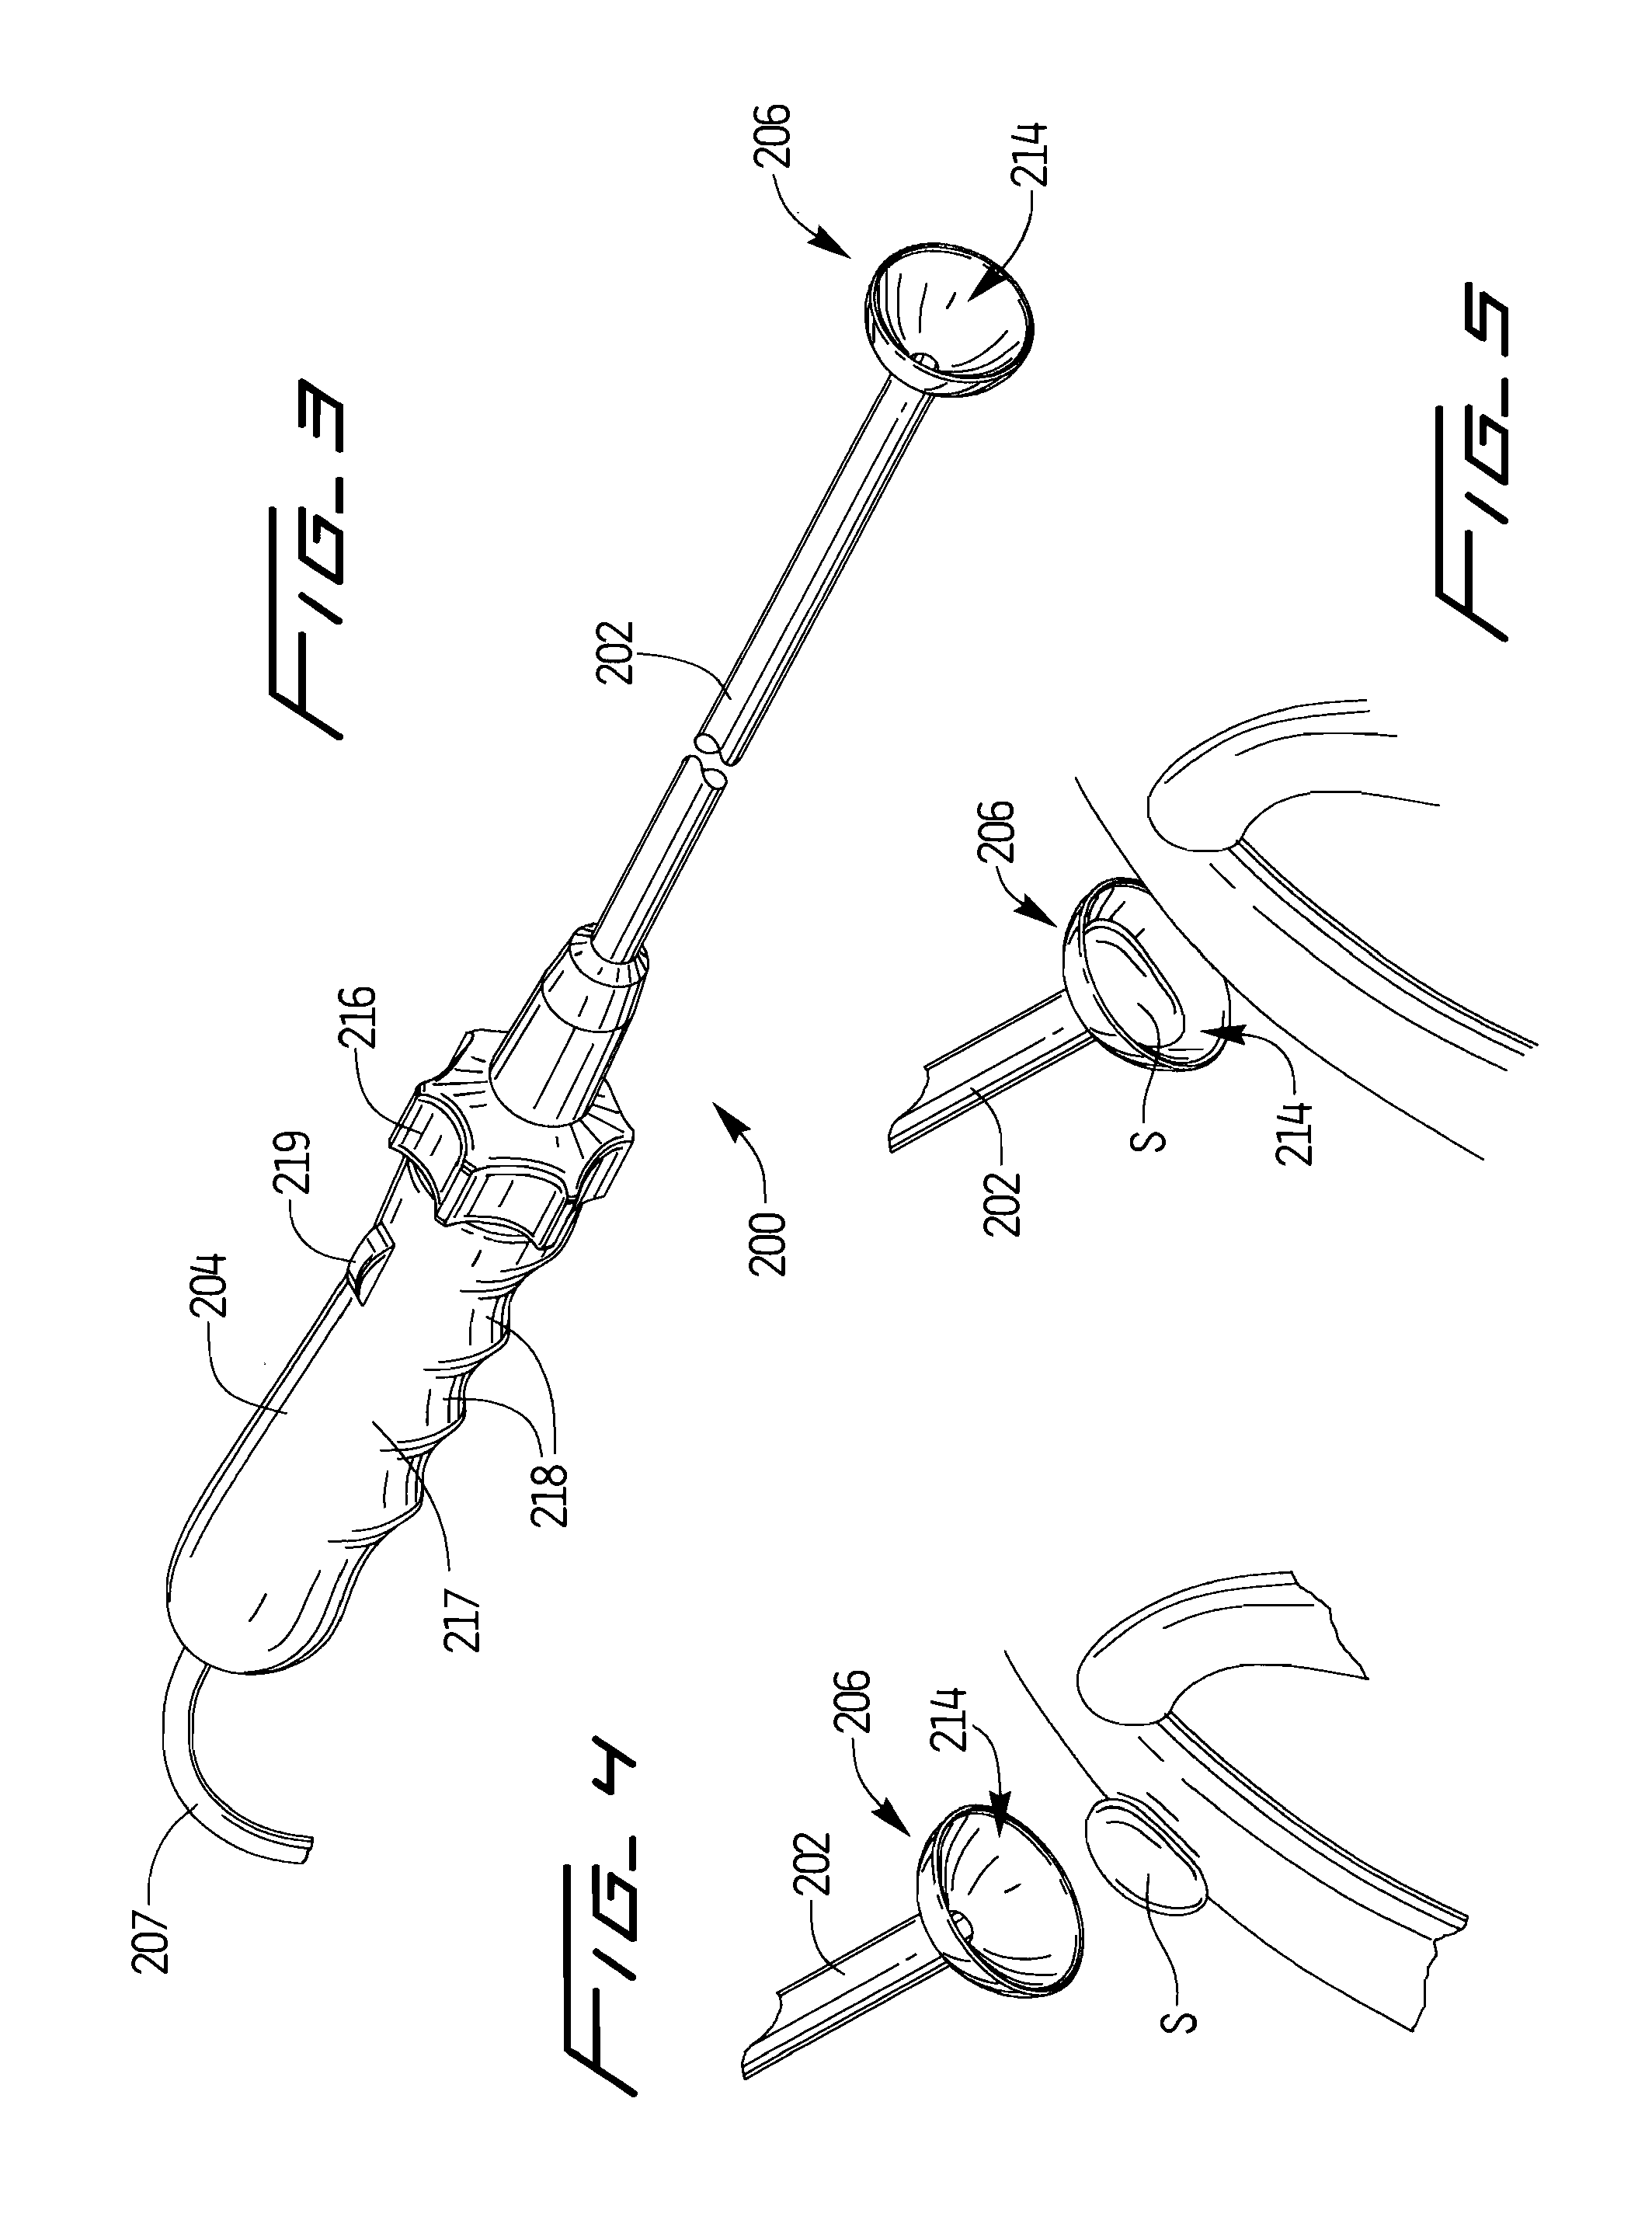 Vacuum assisted surgical dissection tools